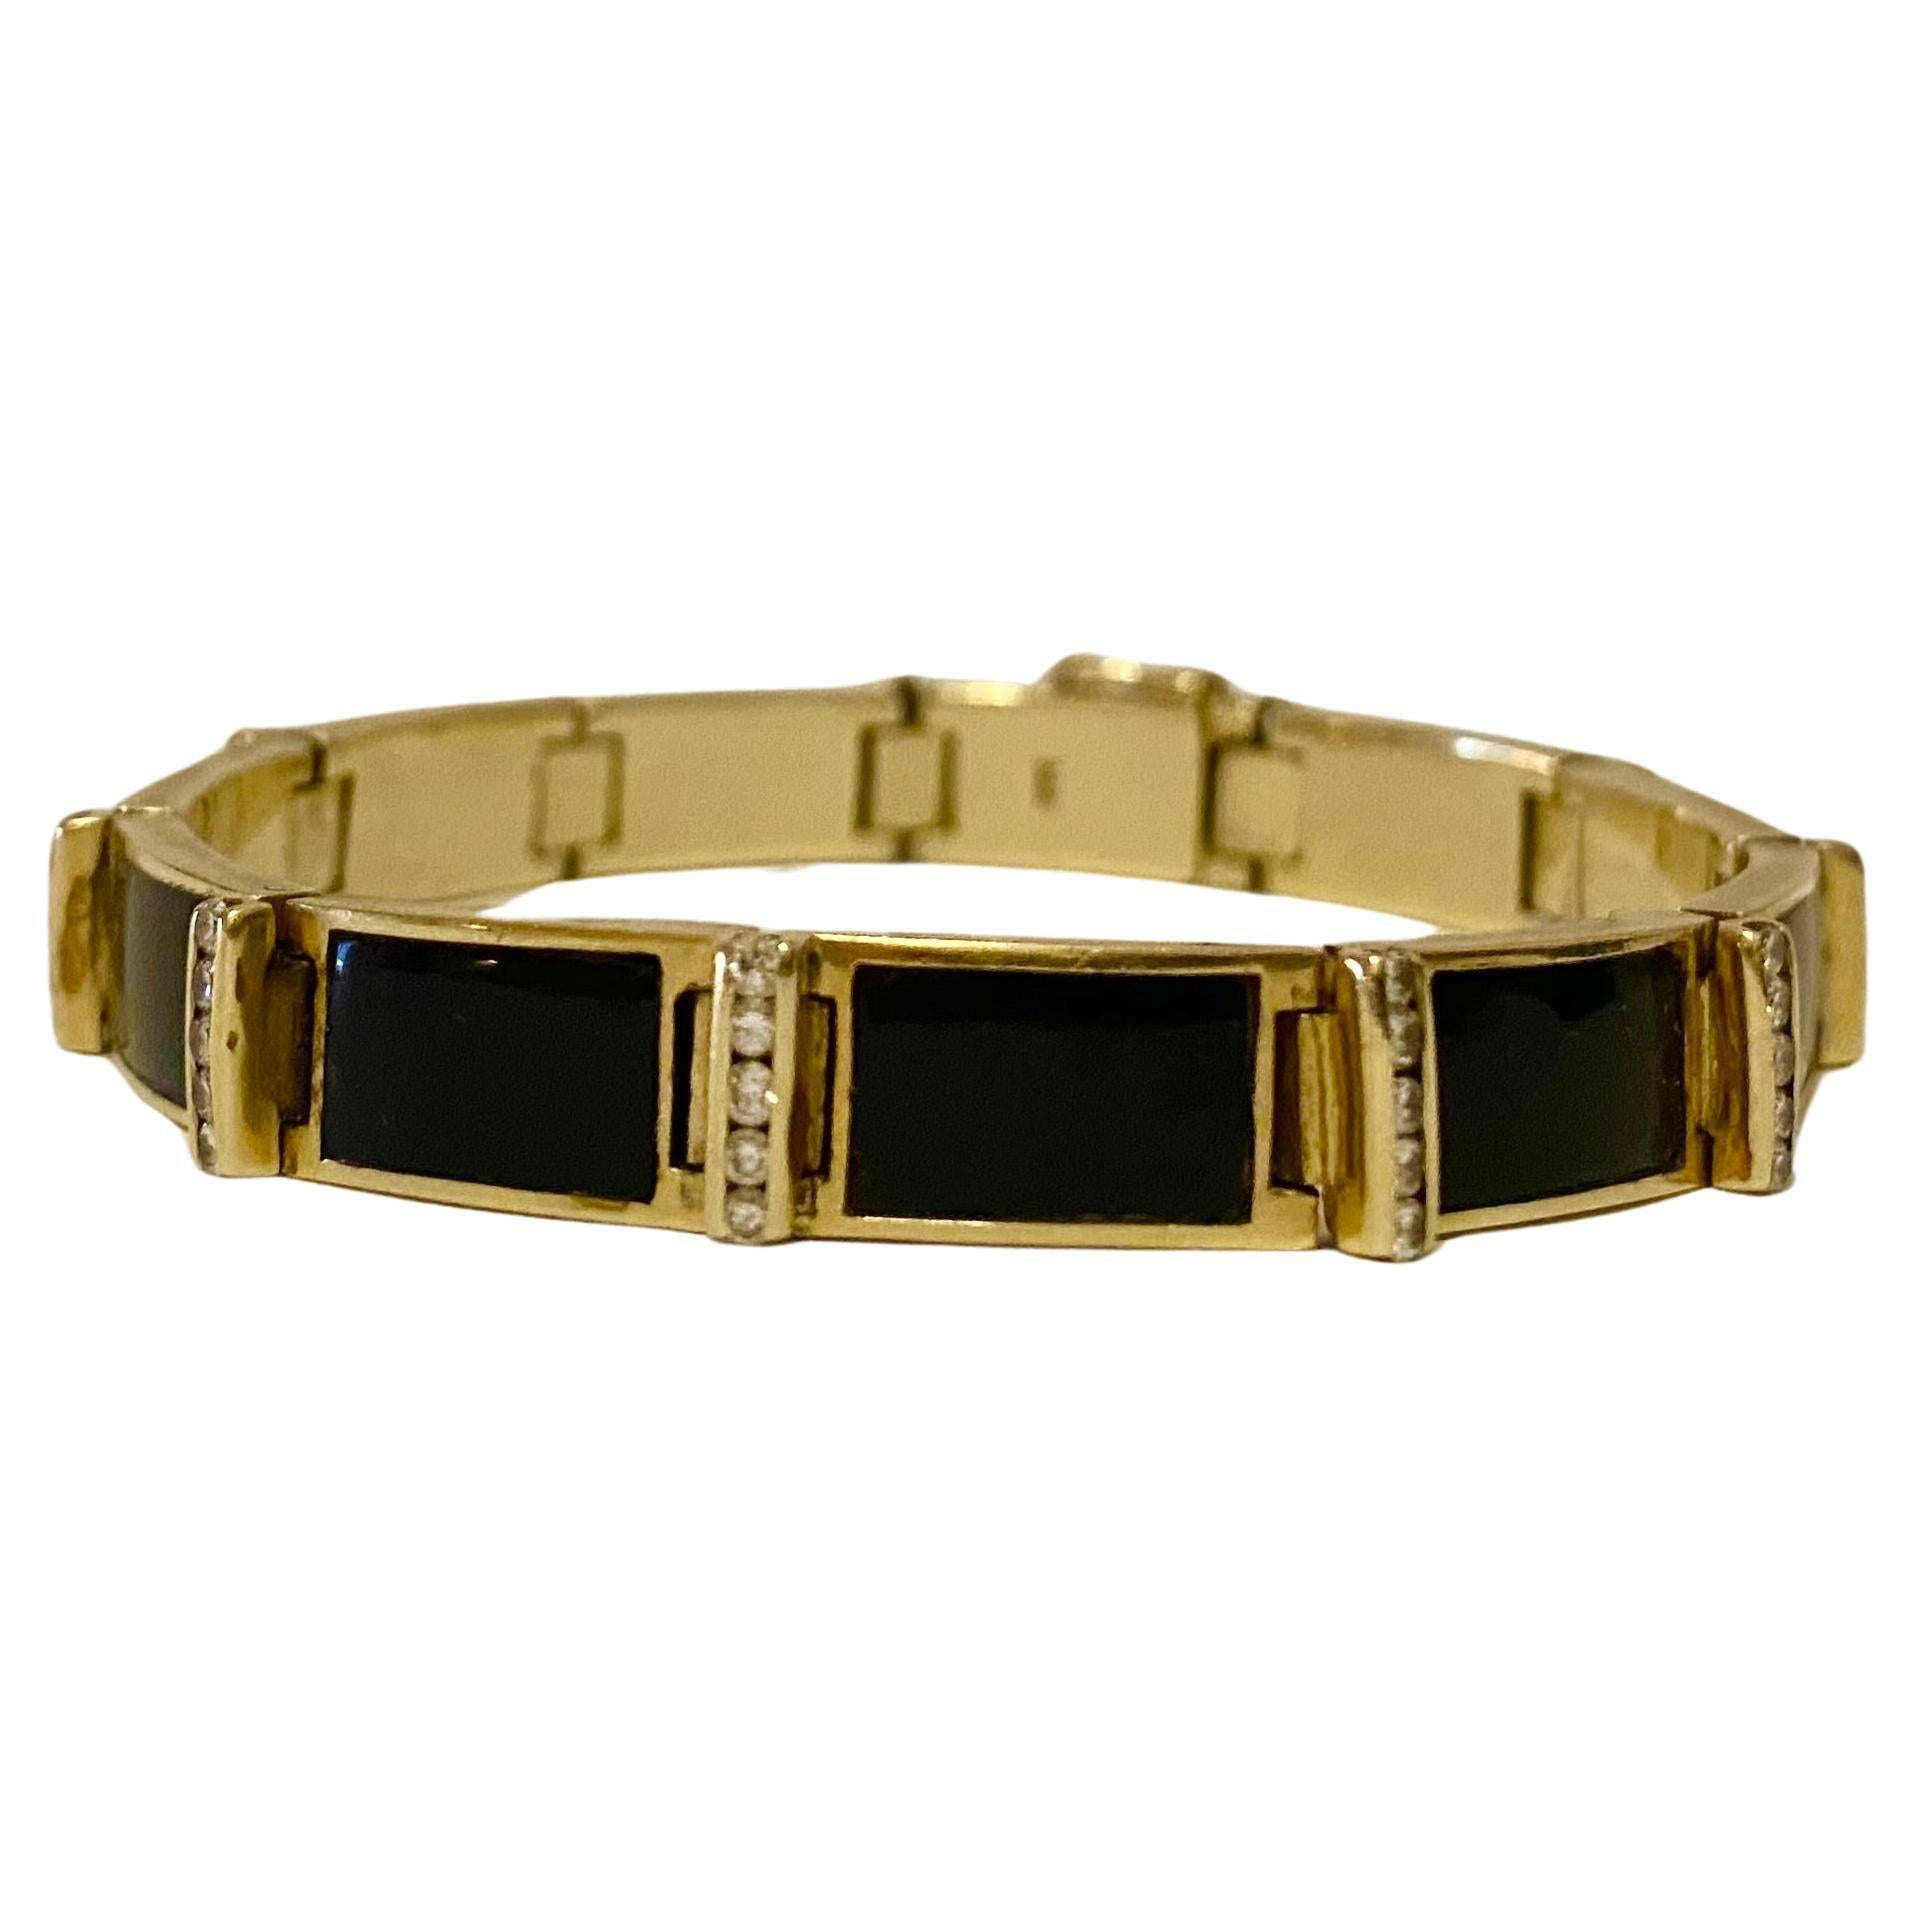 1930s circa, marked 14K (and tested) yellow gold link style bracelet featuring rectangle cut onyx channel set with five round brilliant cut diamonds in between. Hidden box clasp with safety pins. Very good condition. The diamonds are white and clean